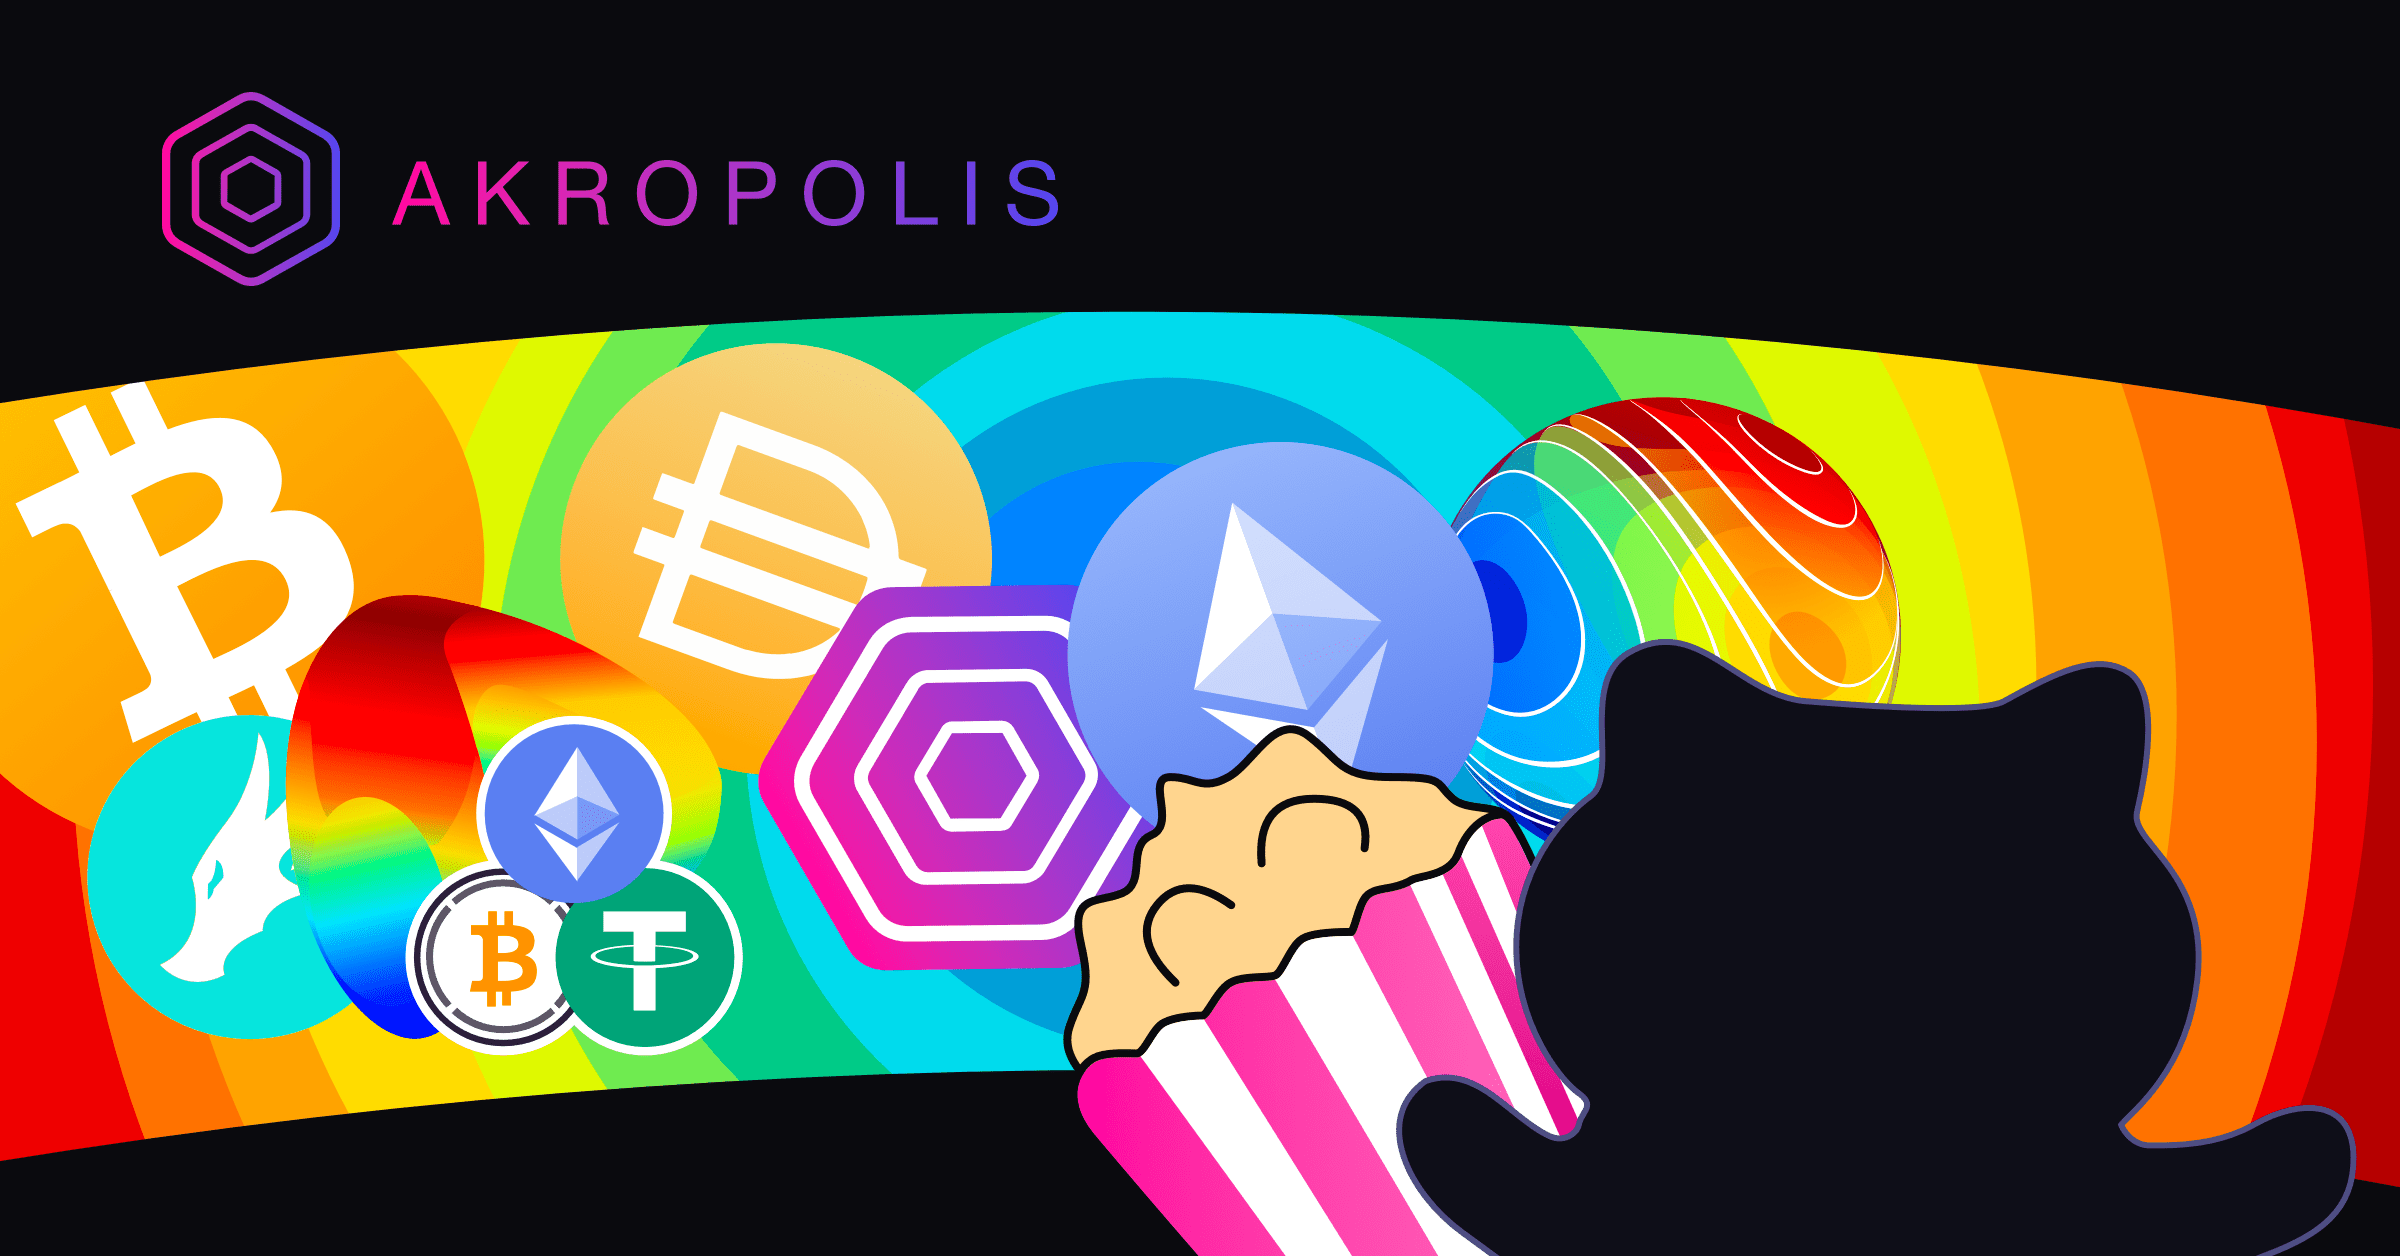 https://www.akropolis.io/images/twitter-card.png